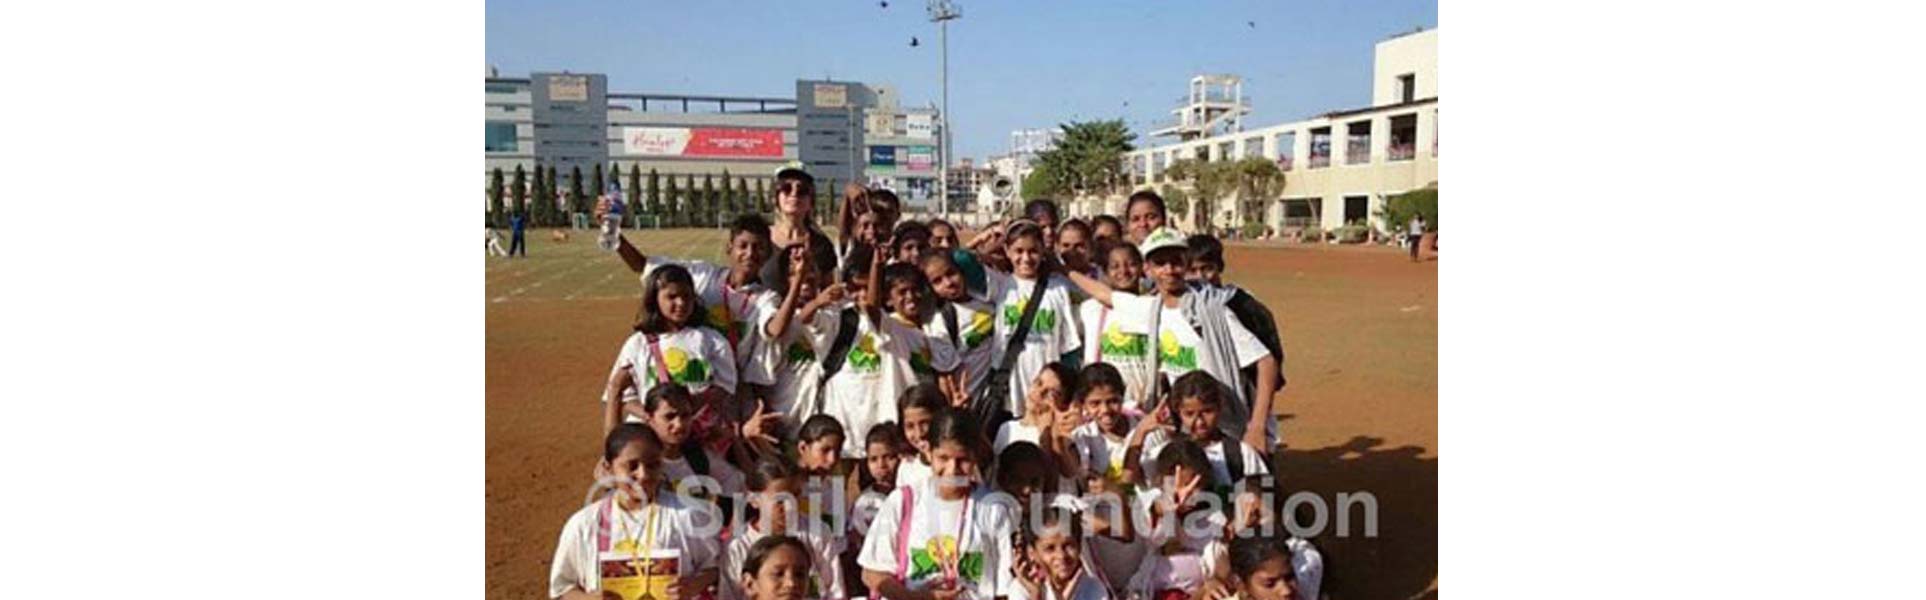 Smile Kids participated in Summer Olympics tournament